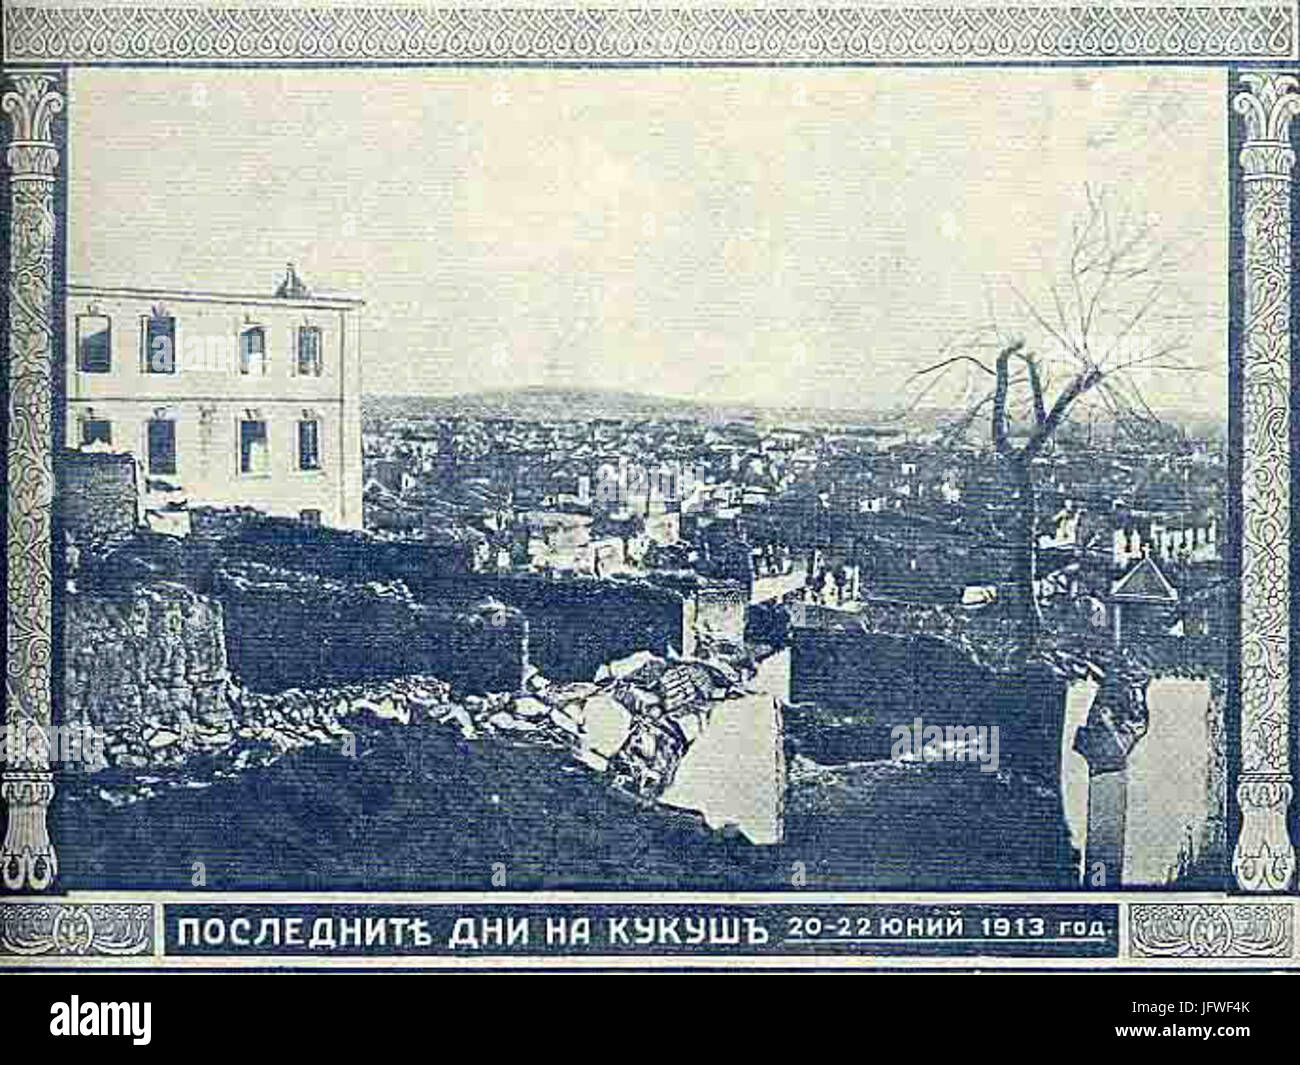 Burned town after Second Balkan War in 1913 Kilkis Greece Stock Photo